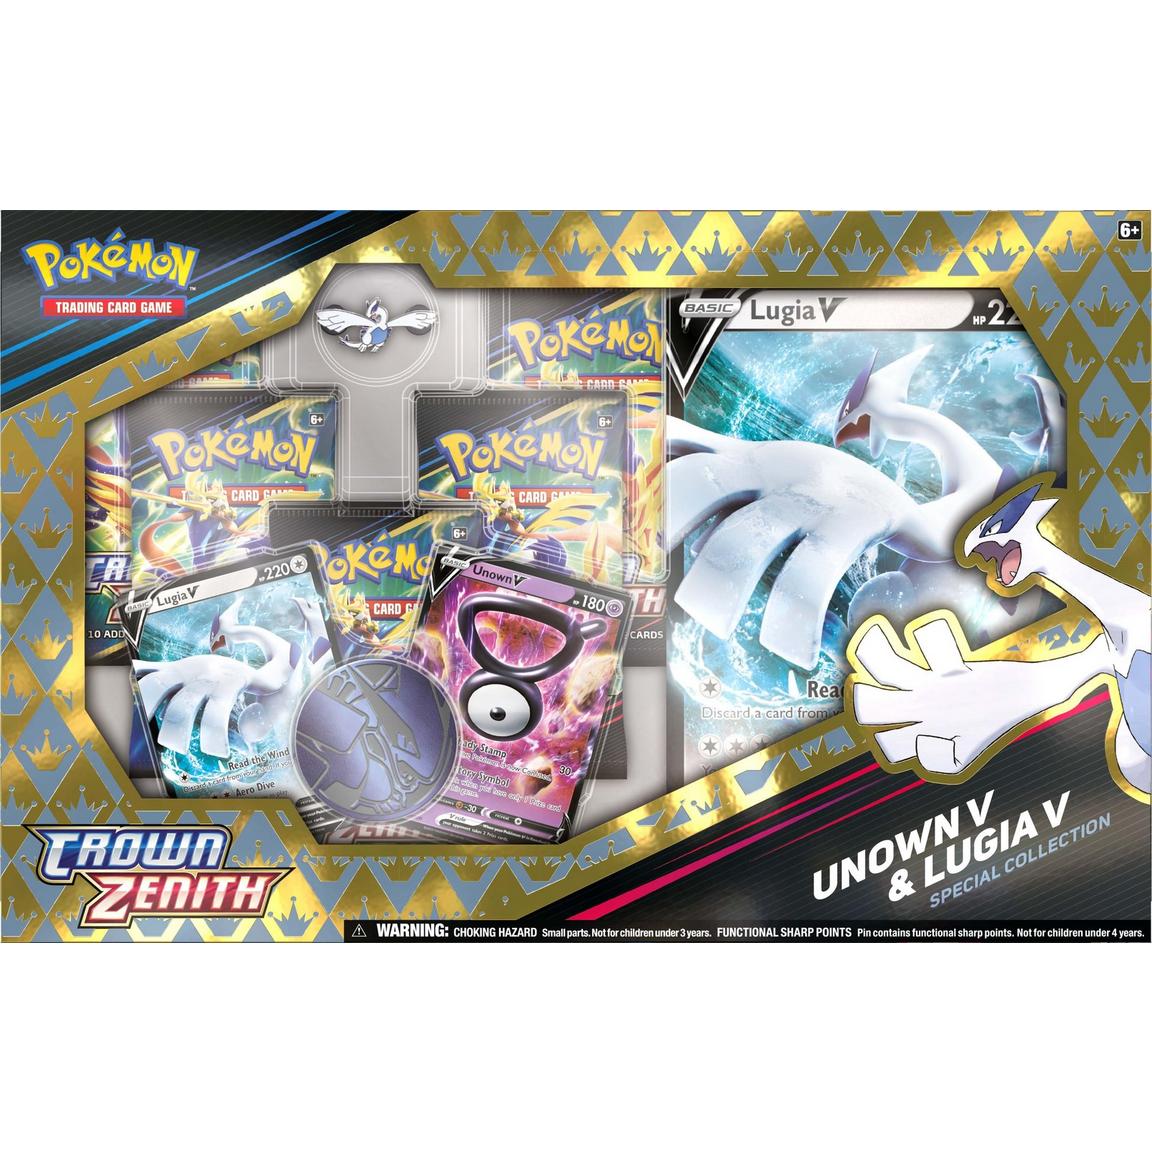 Pokemon Trading Card Game: Crown Zenith Unown V and Lugia V Special Collection Exclusive